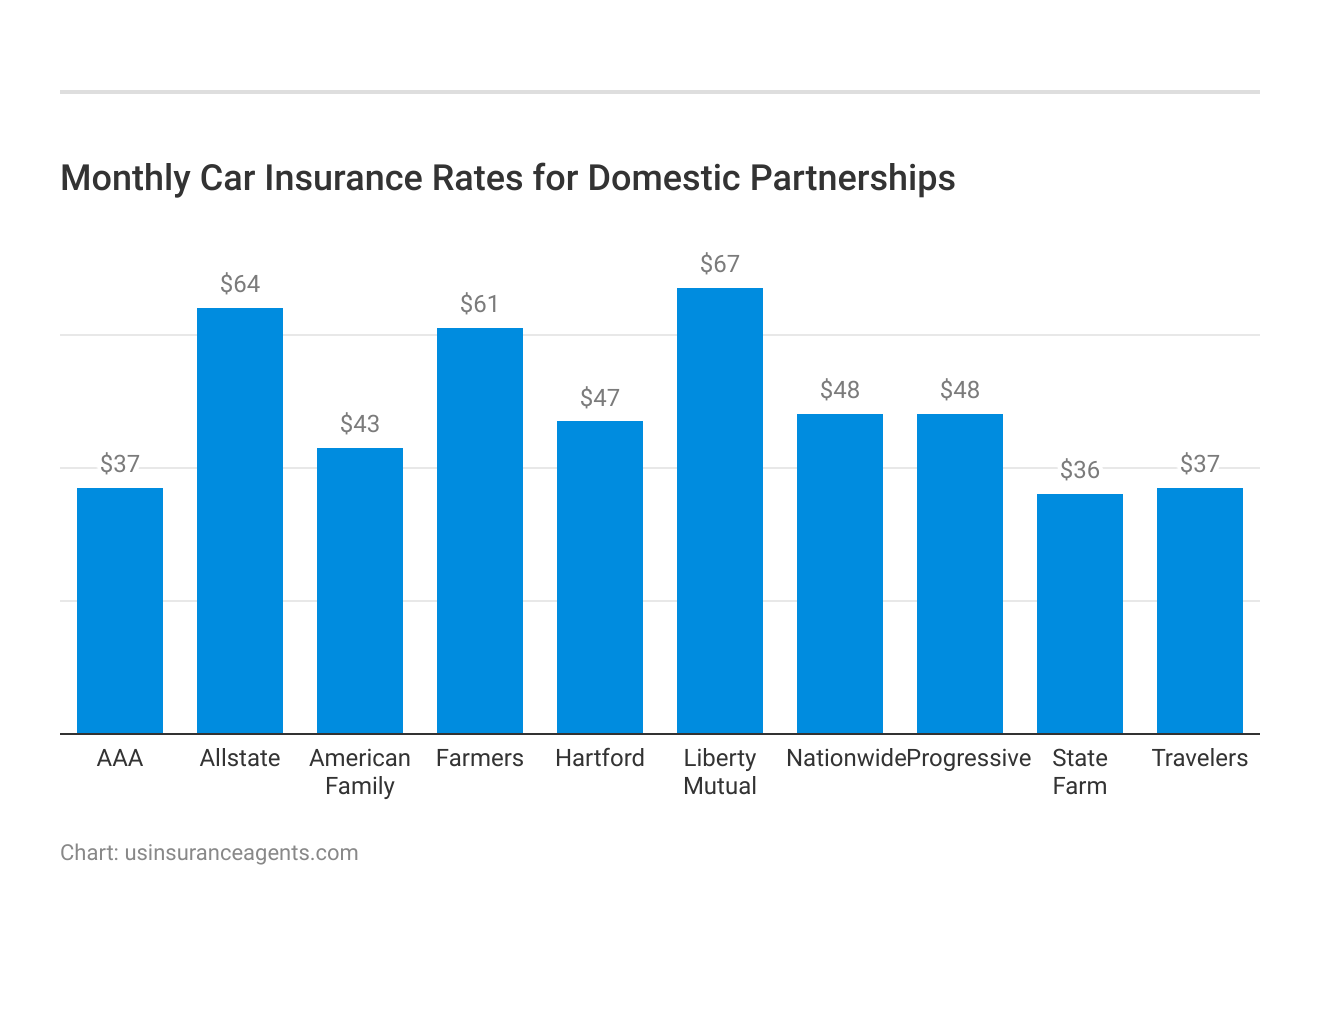 <h3>Monthly Car Insurance Rates for Domestic Partnerships</h3>